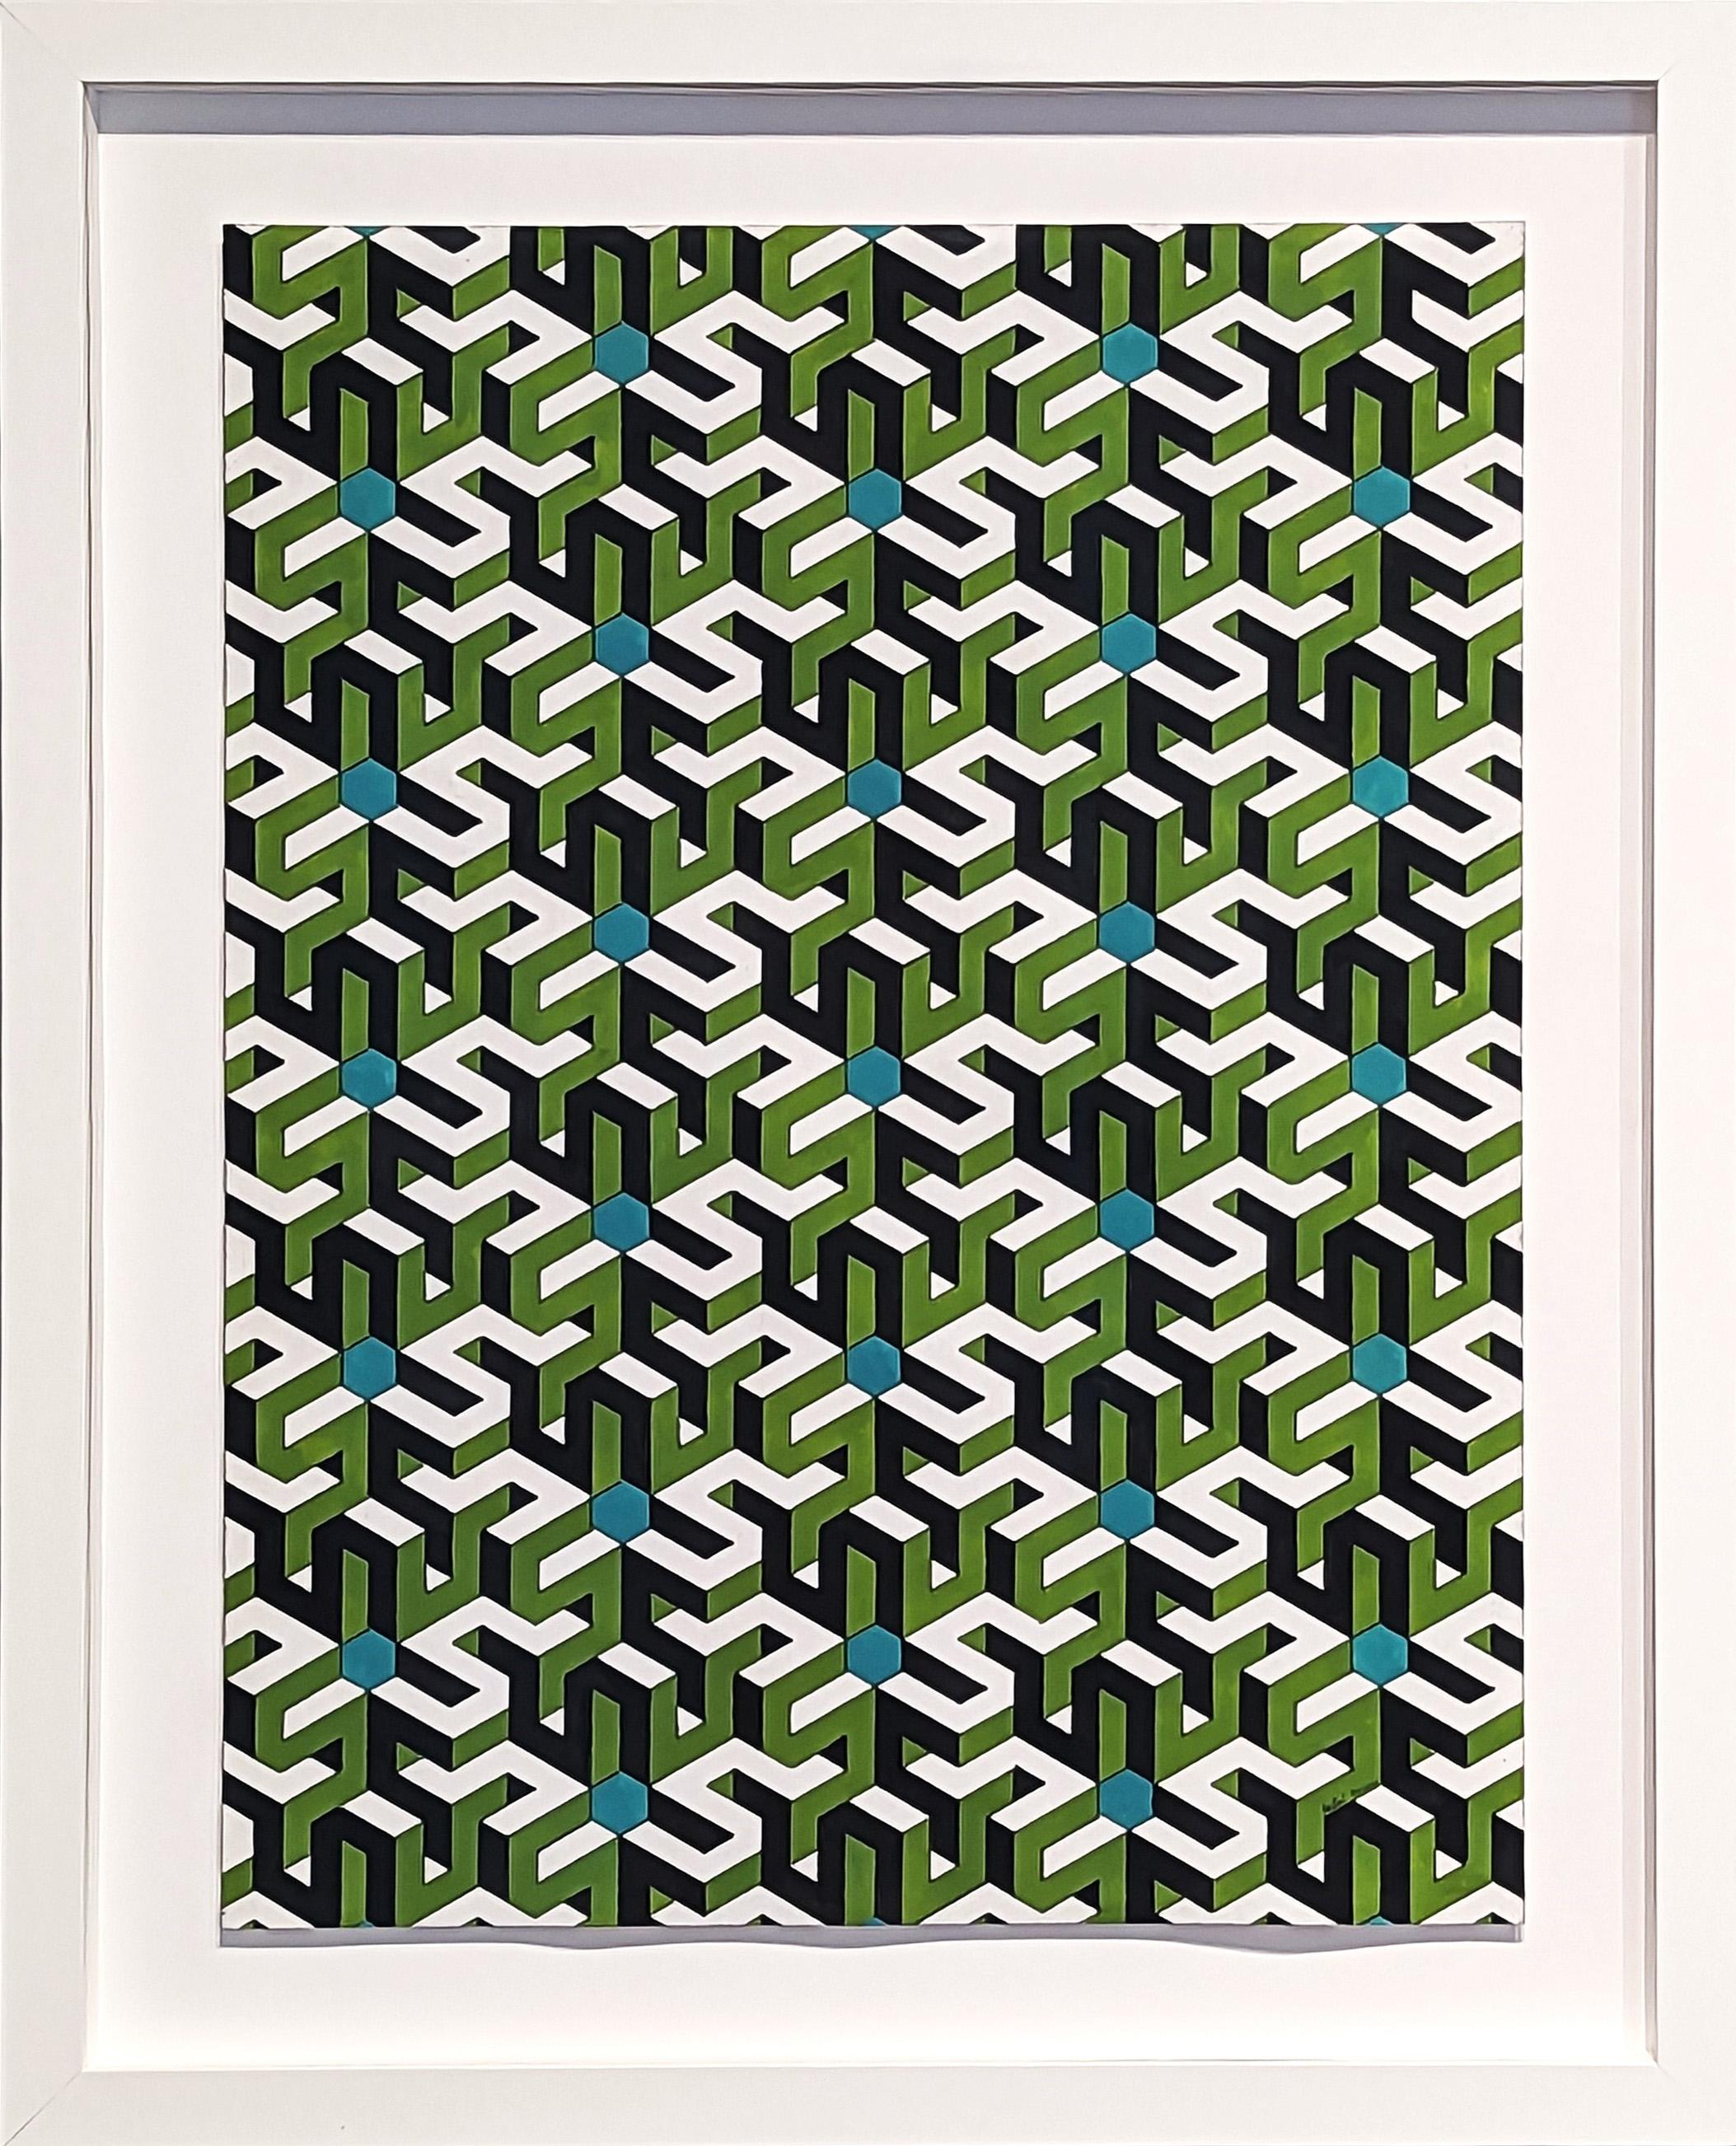 Austin Magruder Abstract Drawing – "Opposite Underlap" Contemporary Green and Aqua Hand Drawn Tessellated Abstract